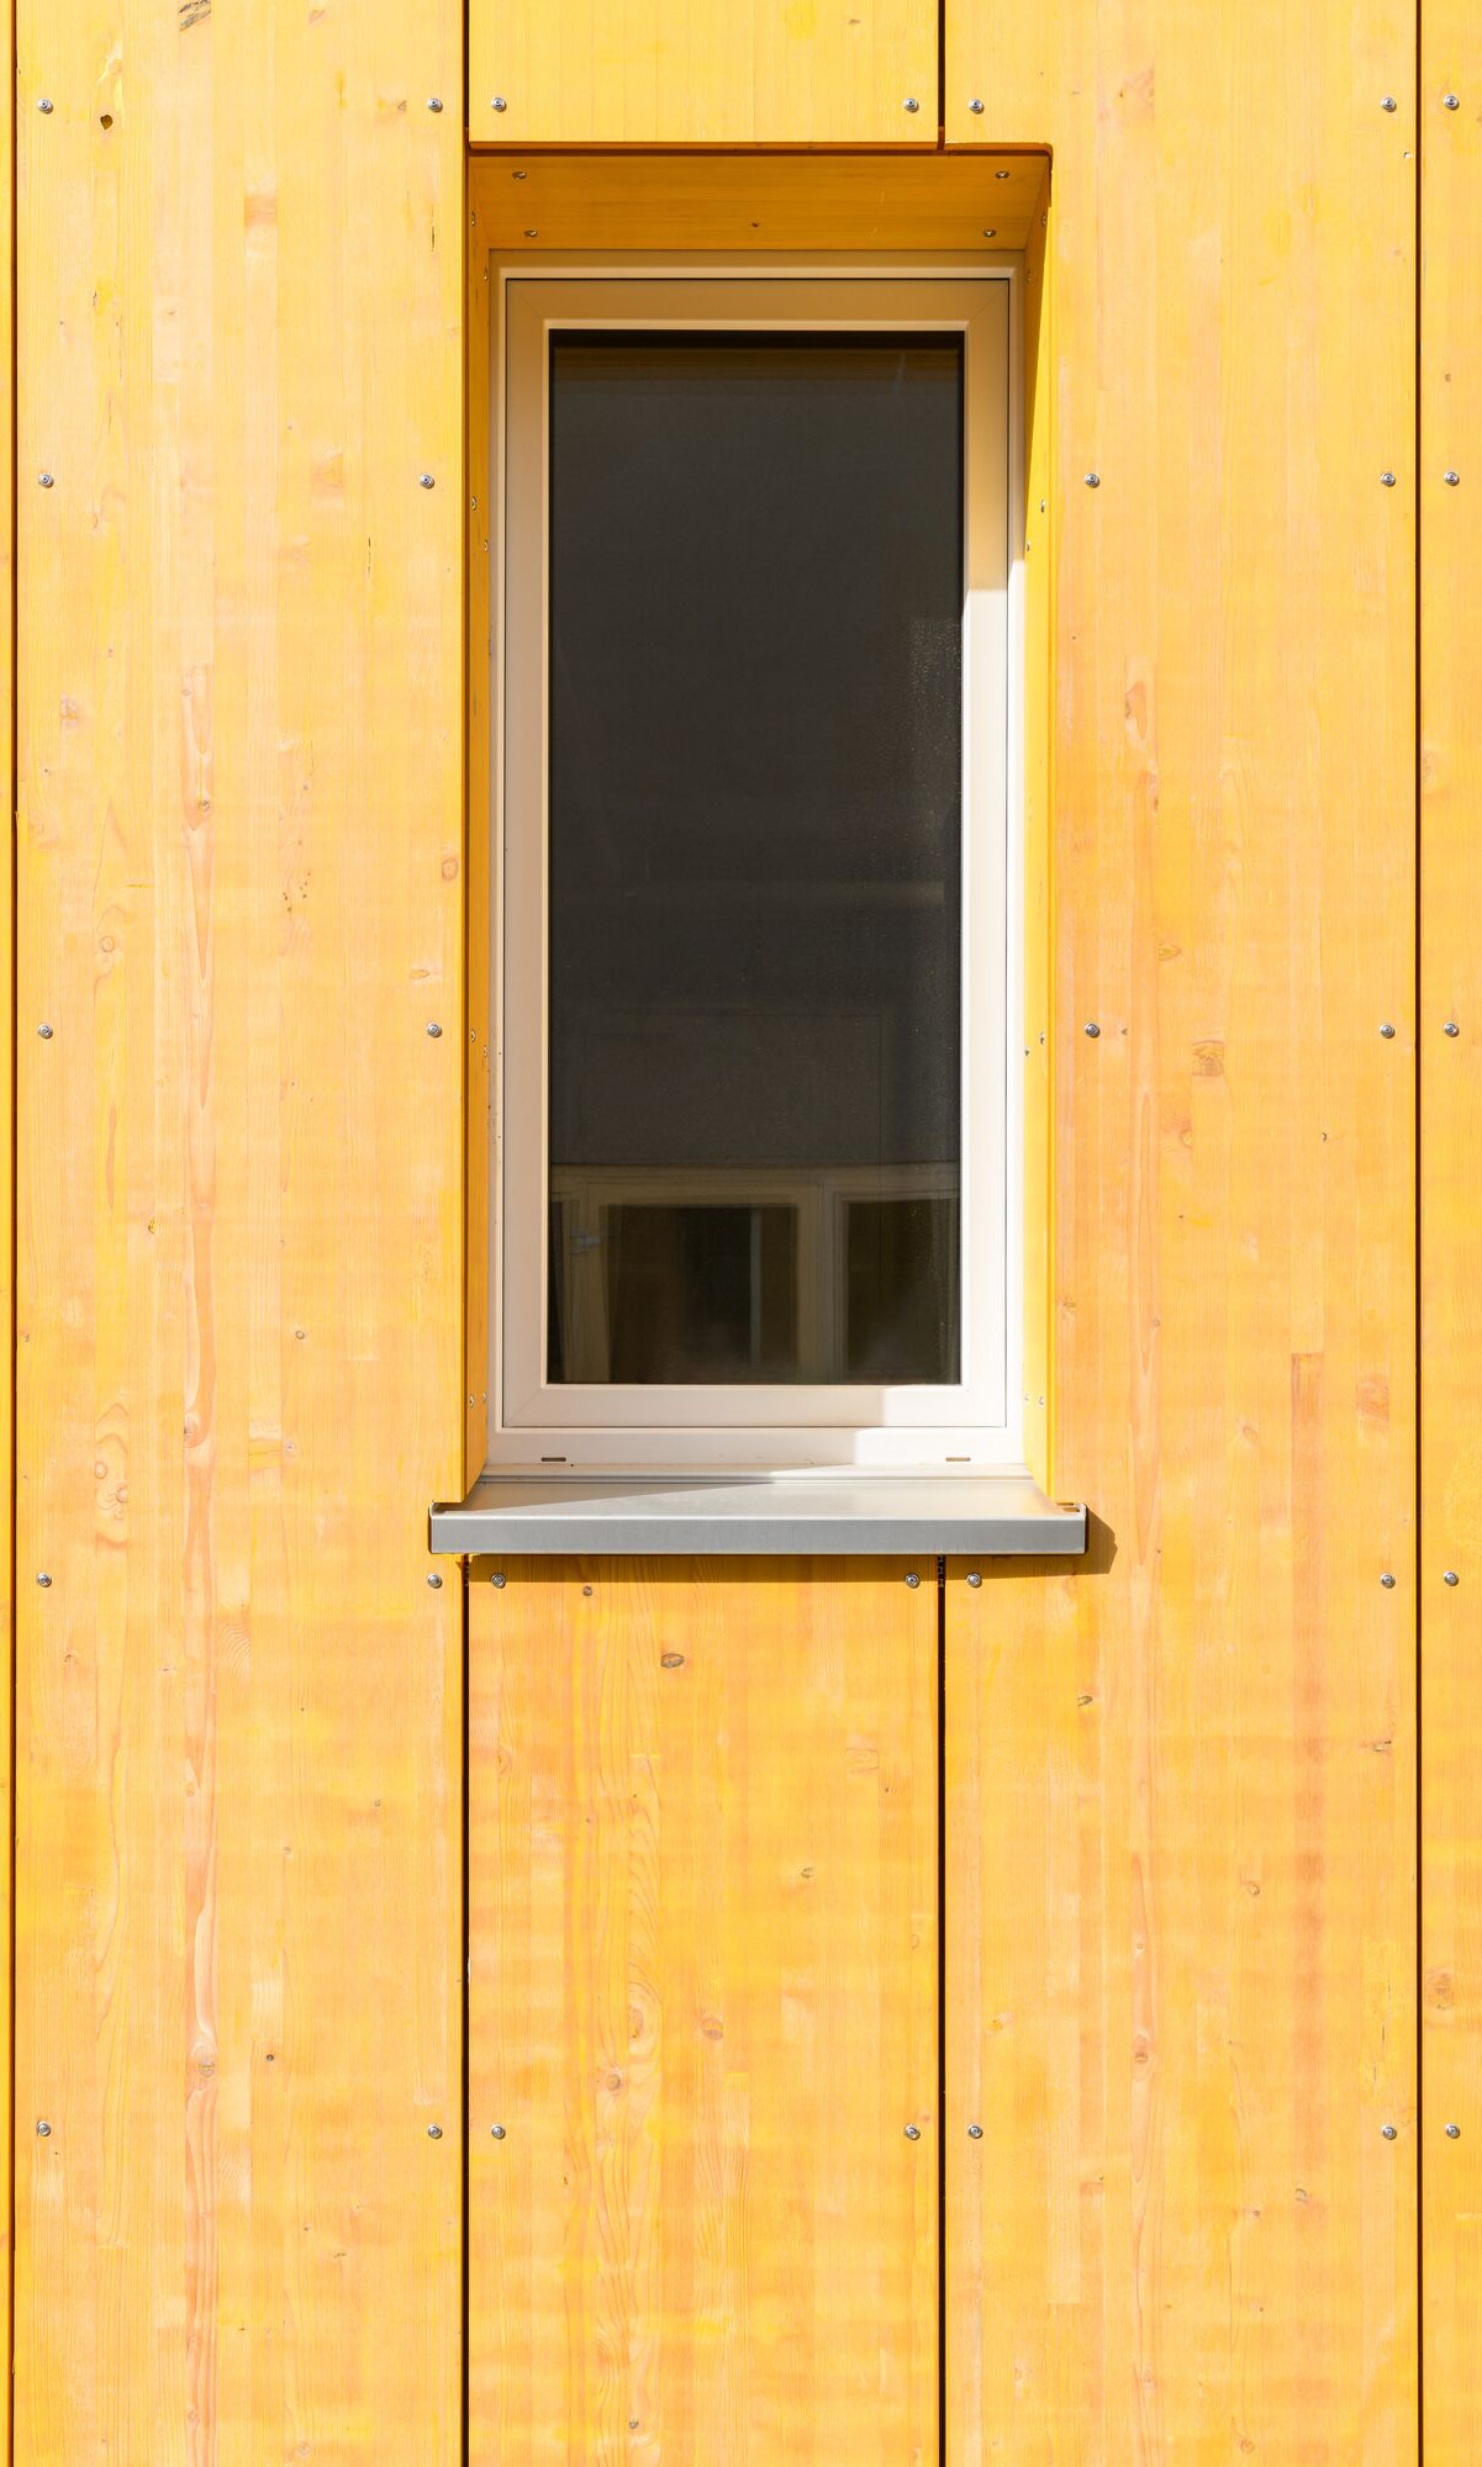 Window and facade made from yellow panels<br/><br/>